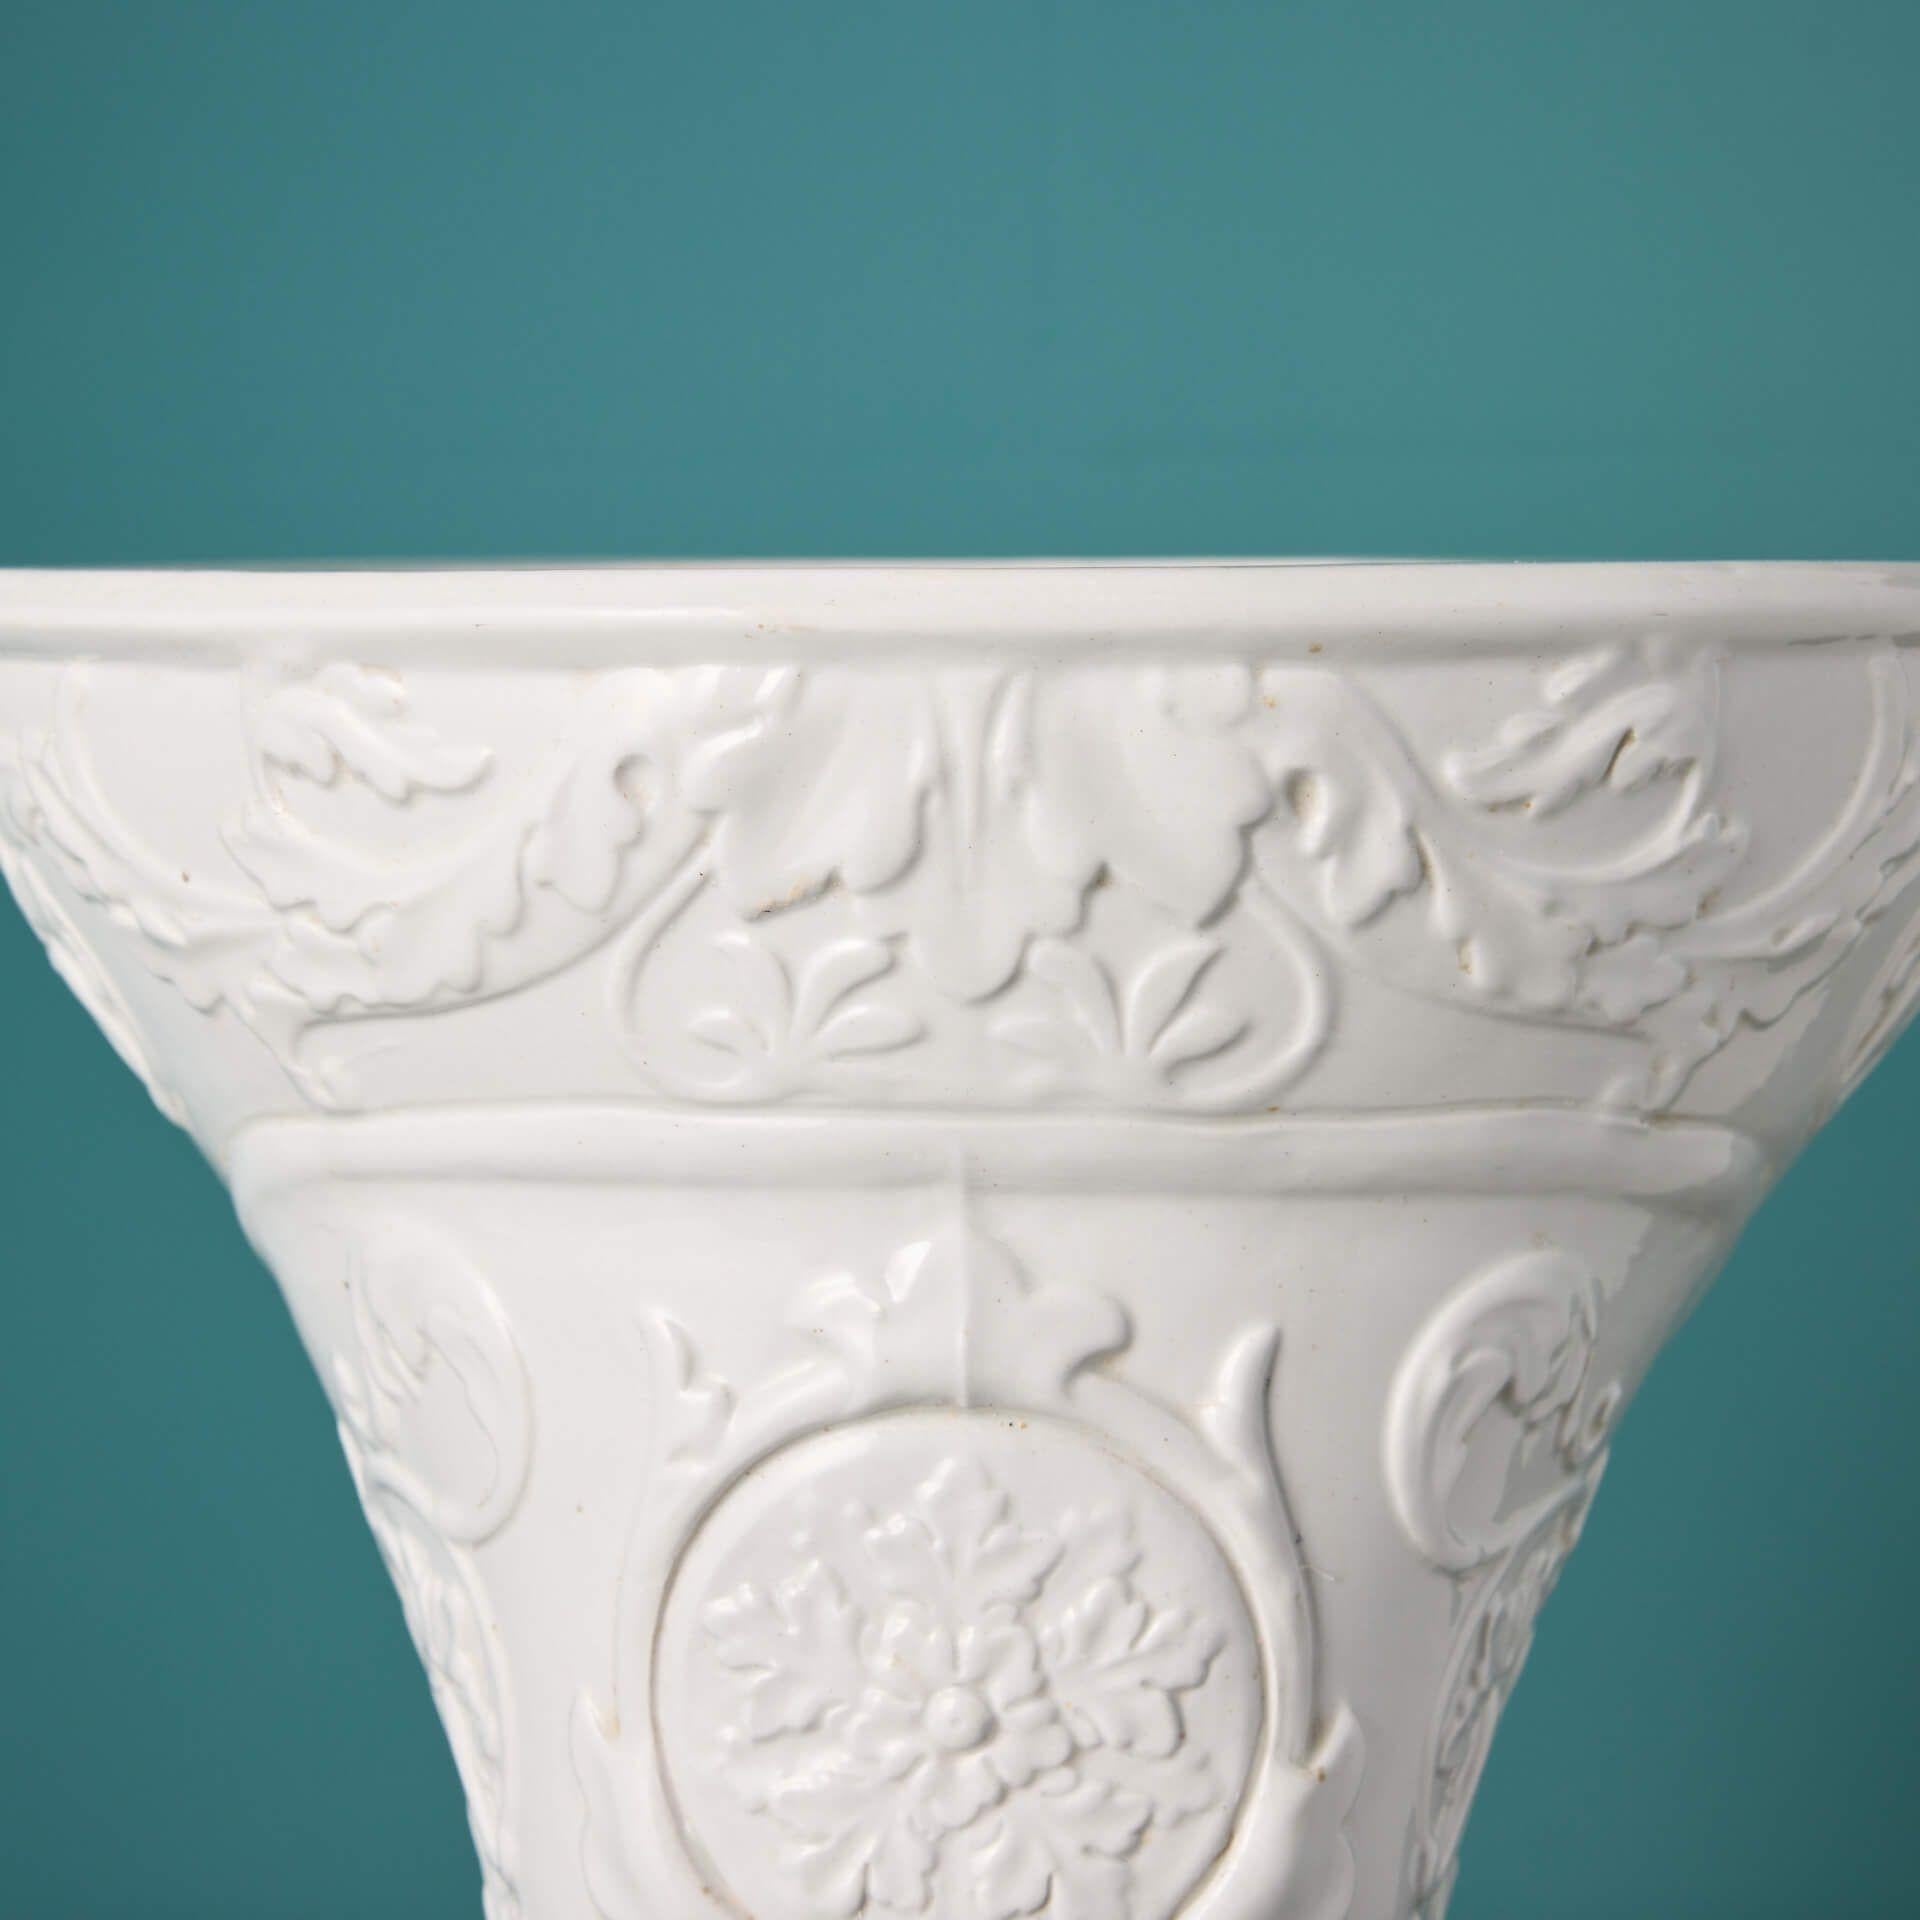 Glazed White Porcelain Embossed Antique ‘Severn’ Toilet or WC In Excellent Condition For Sale In Wormelow, Herefordshire